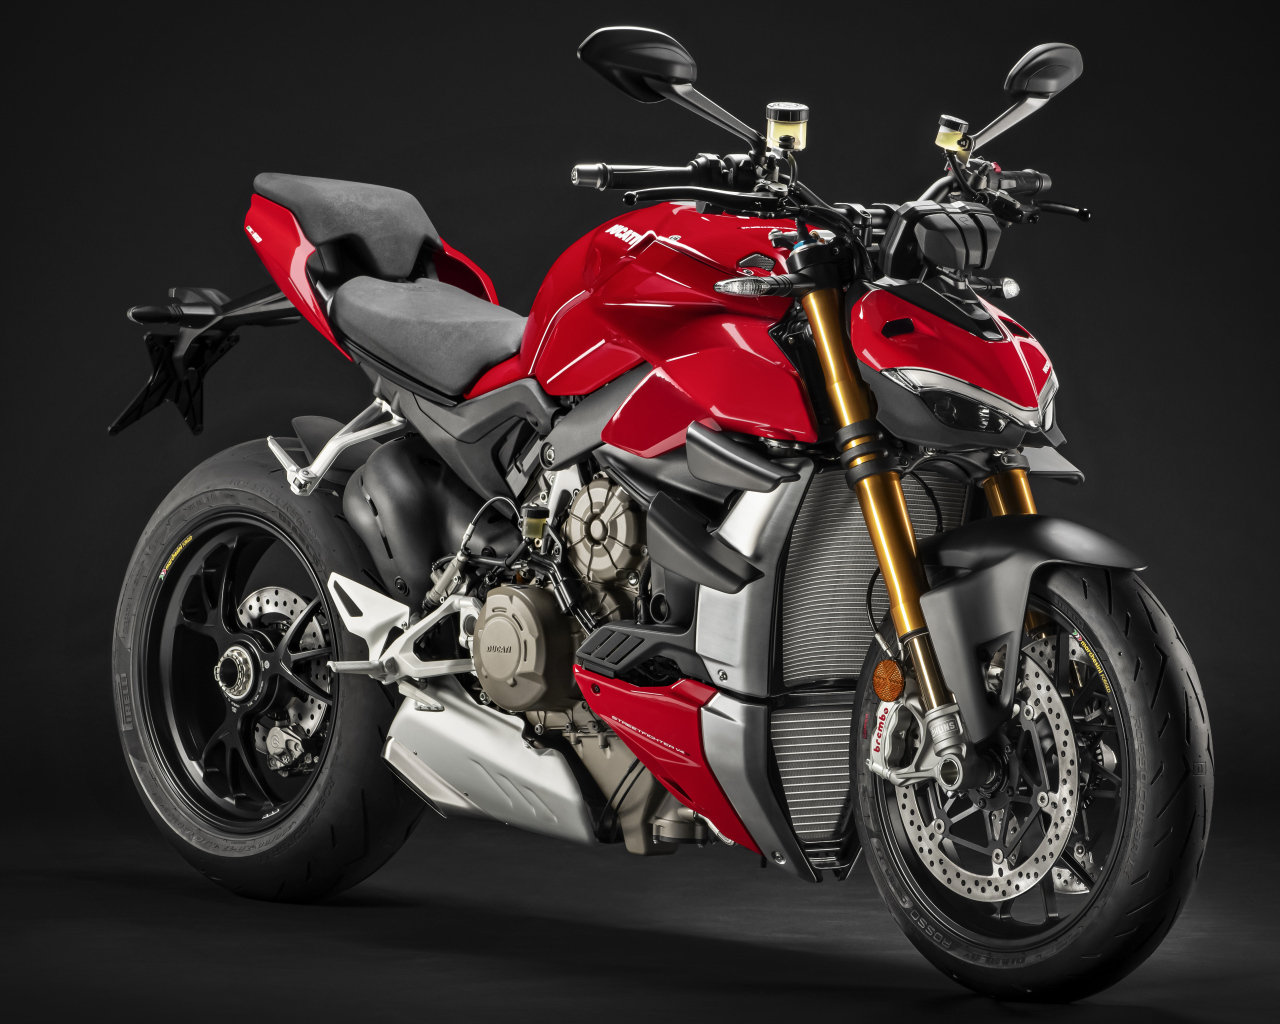 2021 Ducati V4 Streetfighter motorcycle against gray background